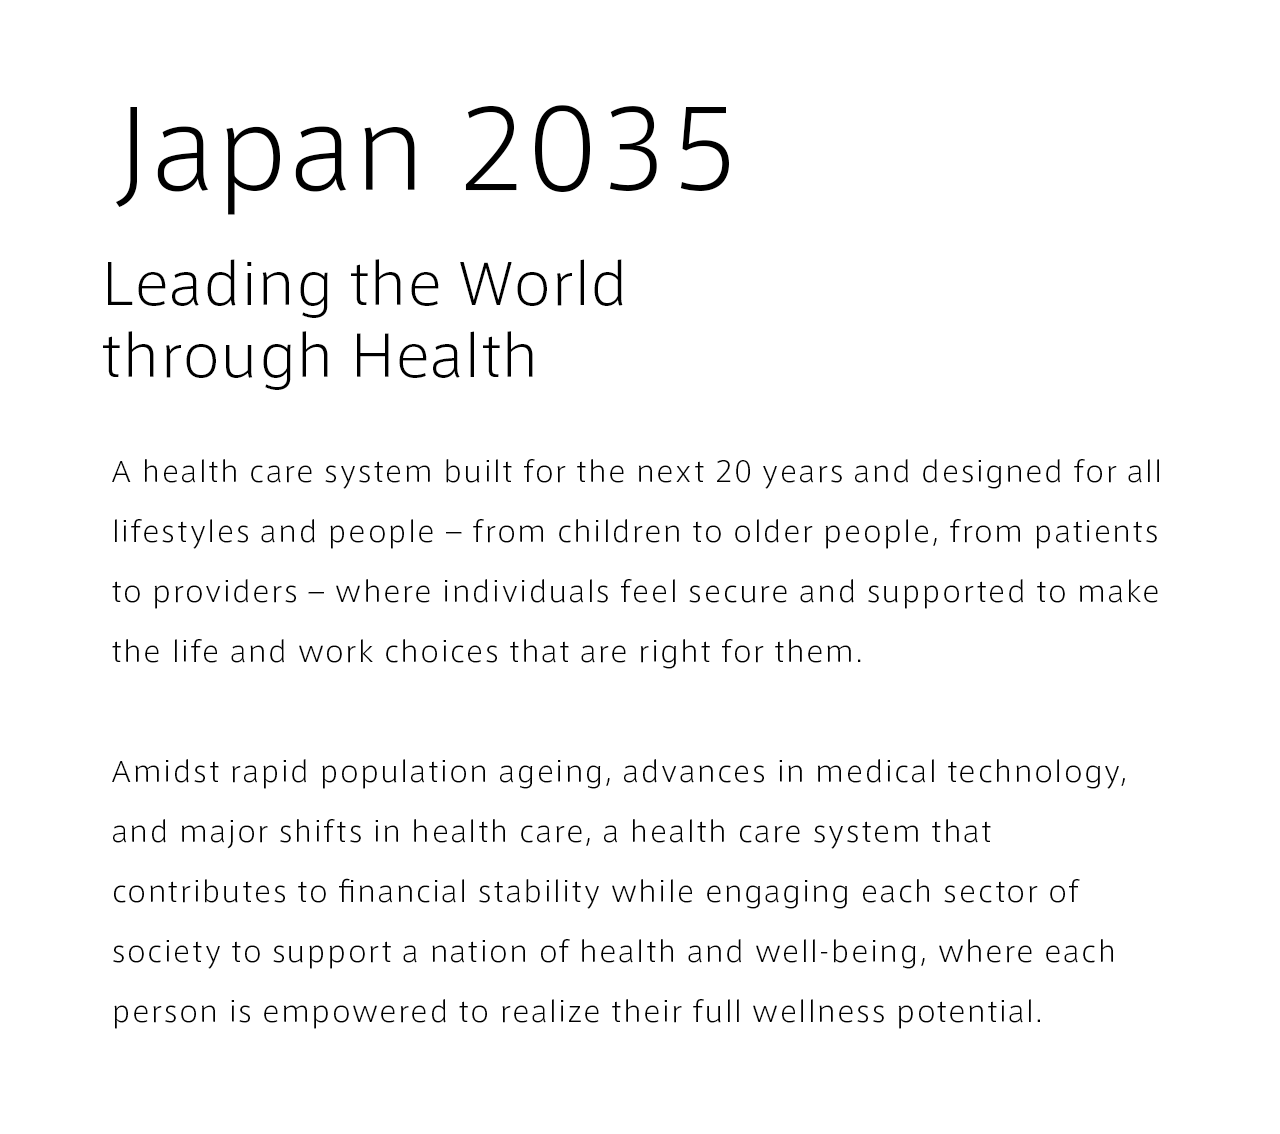 Japan 2035 Leading the World through Health. A health care system built for the next 20 years and designed for all lifestyles and people – from children to older people, from patients to providers – where individuals feel secure and supported to make the life and work choices that are right for them. Amidst rapid population ageing, advances in medical technology, and major shifts in health care, a health care system that contributes to financial stability while engaging each sector of society to support a nation of health and well-being, where each person is empowered to realize their full wellness potential.